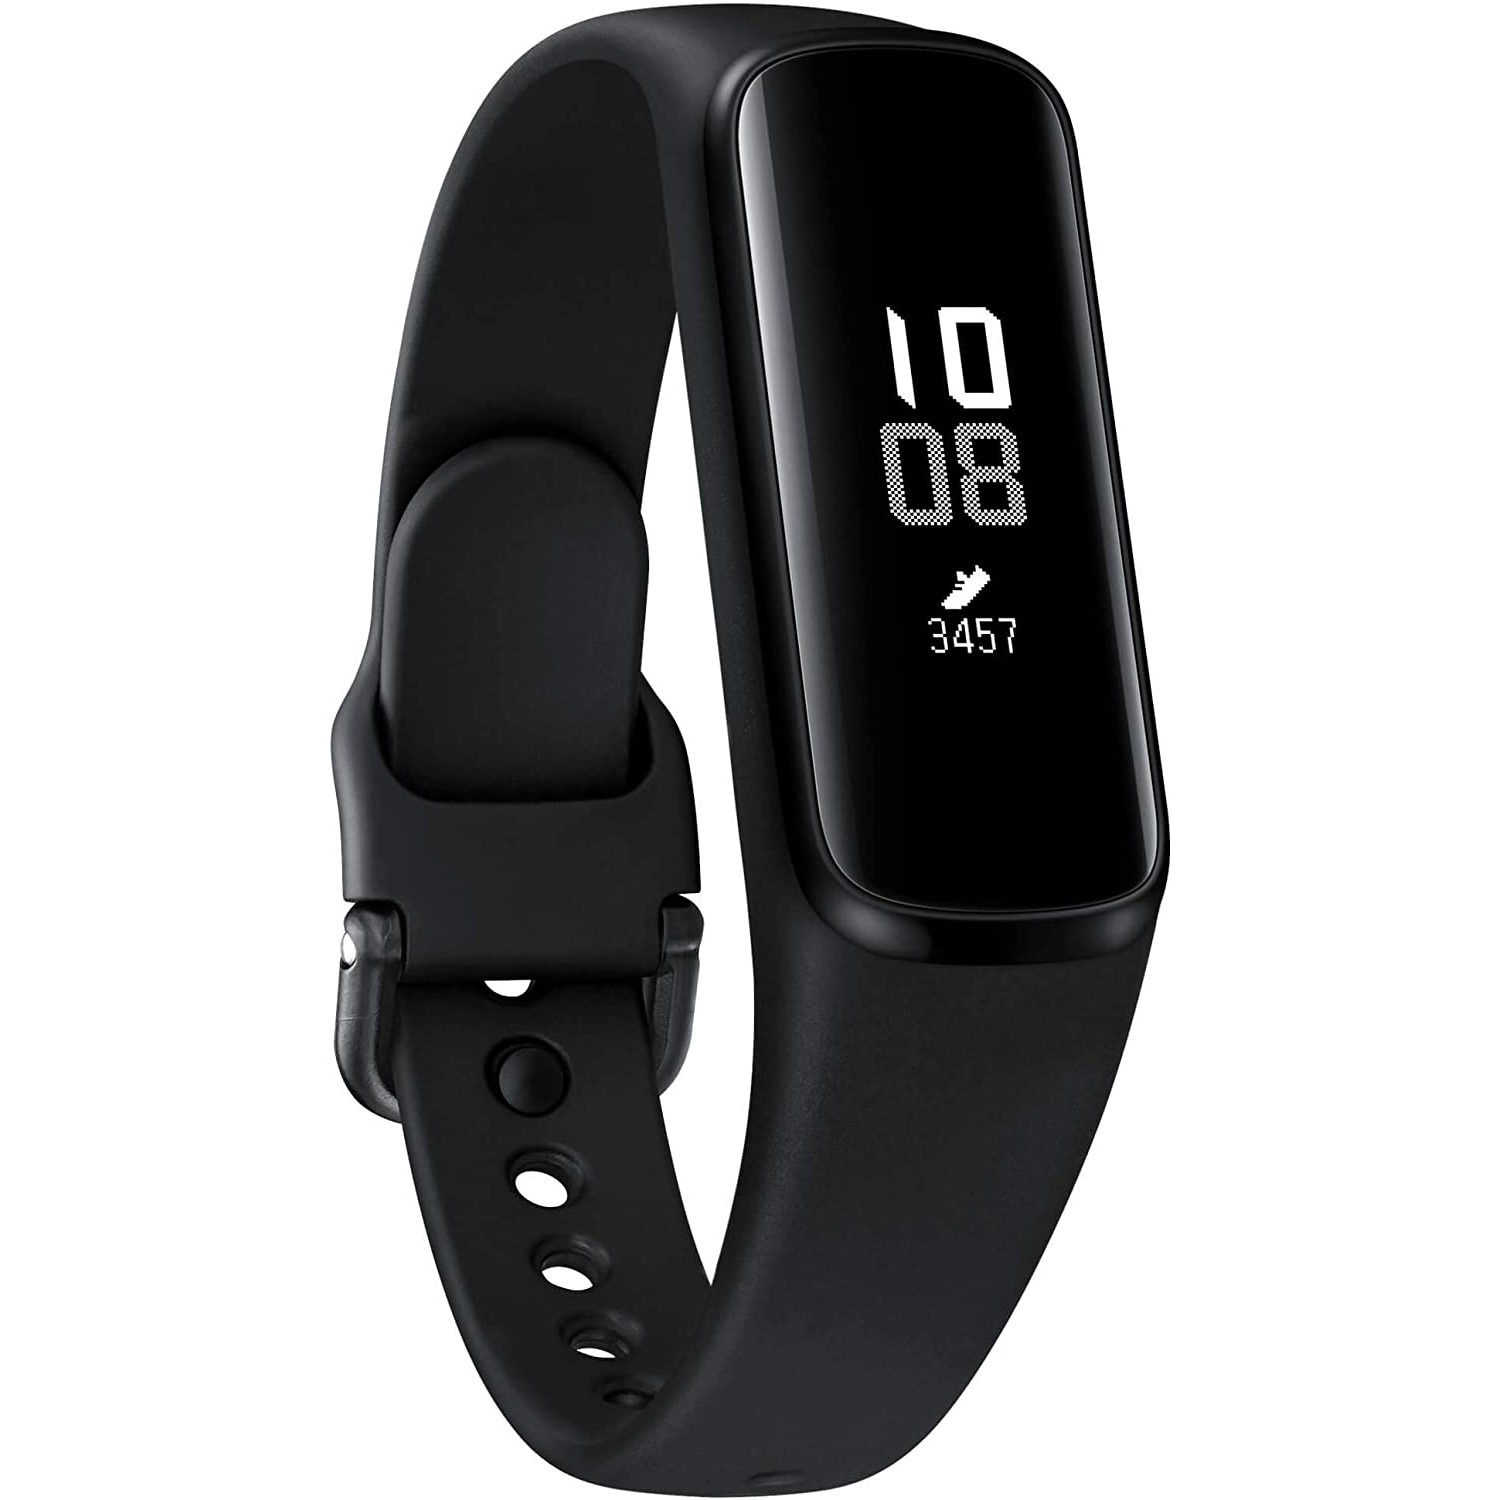 Samsung Galaxy Fit E 2019, Fitness Band, Pedometer, Heart Rate & Sleep Tracker, PMOLED Display, 5ATM Water Resistance - Black - Open Box